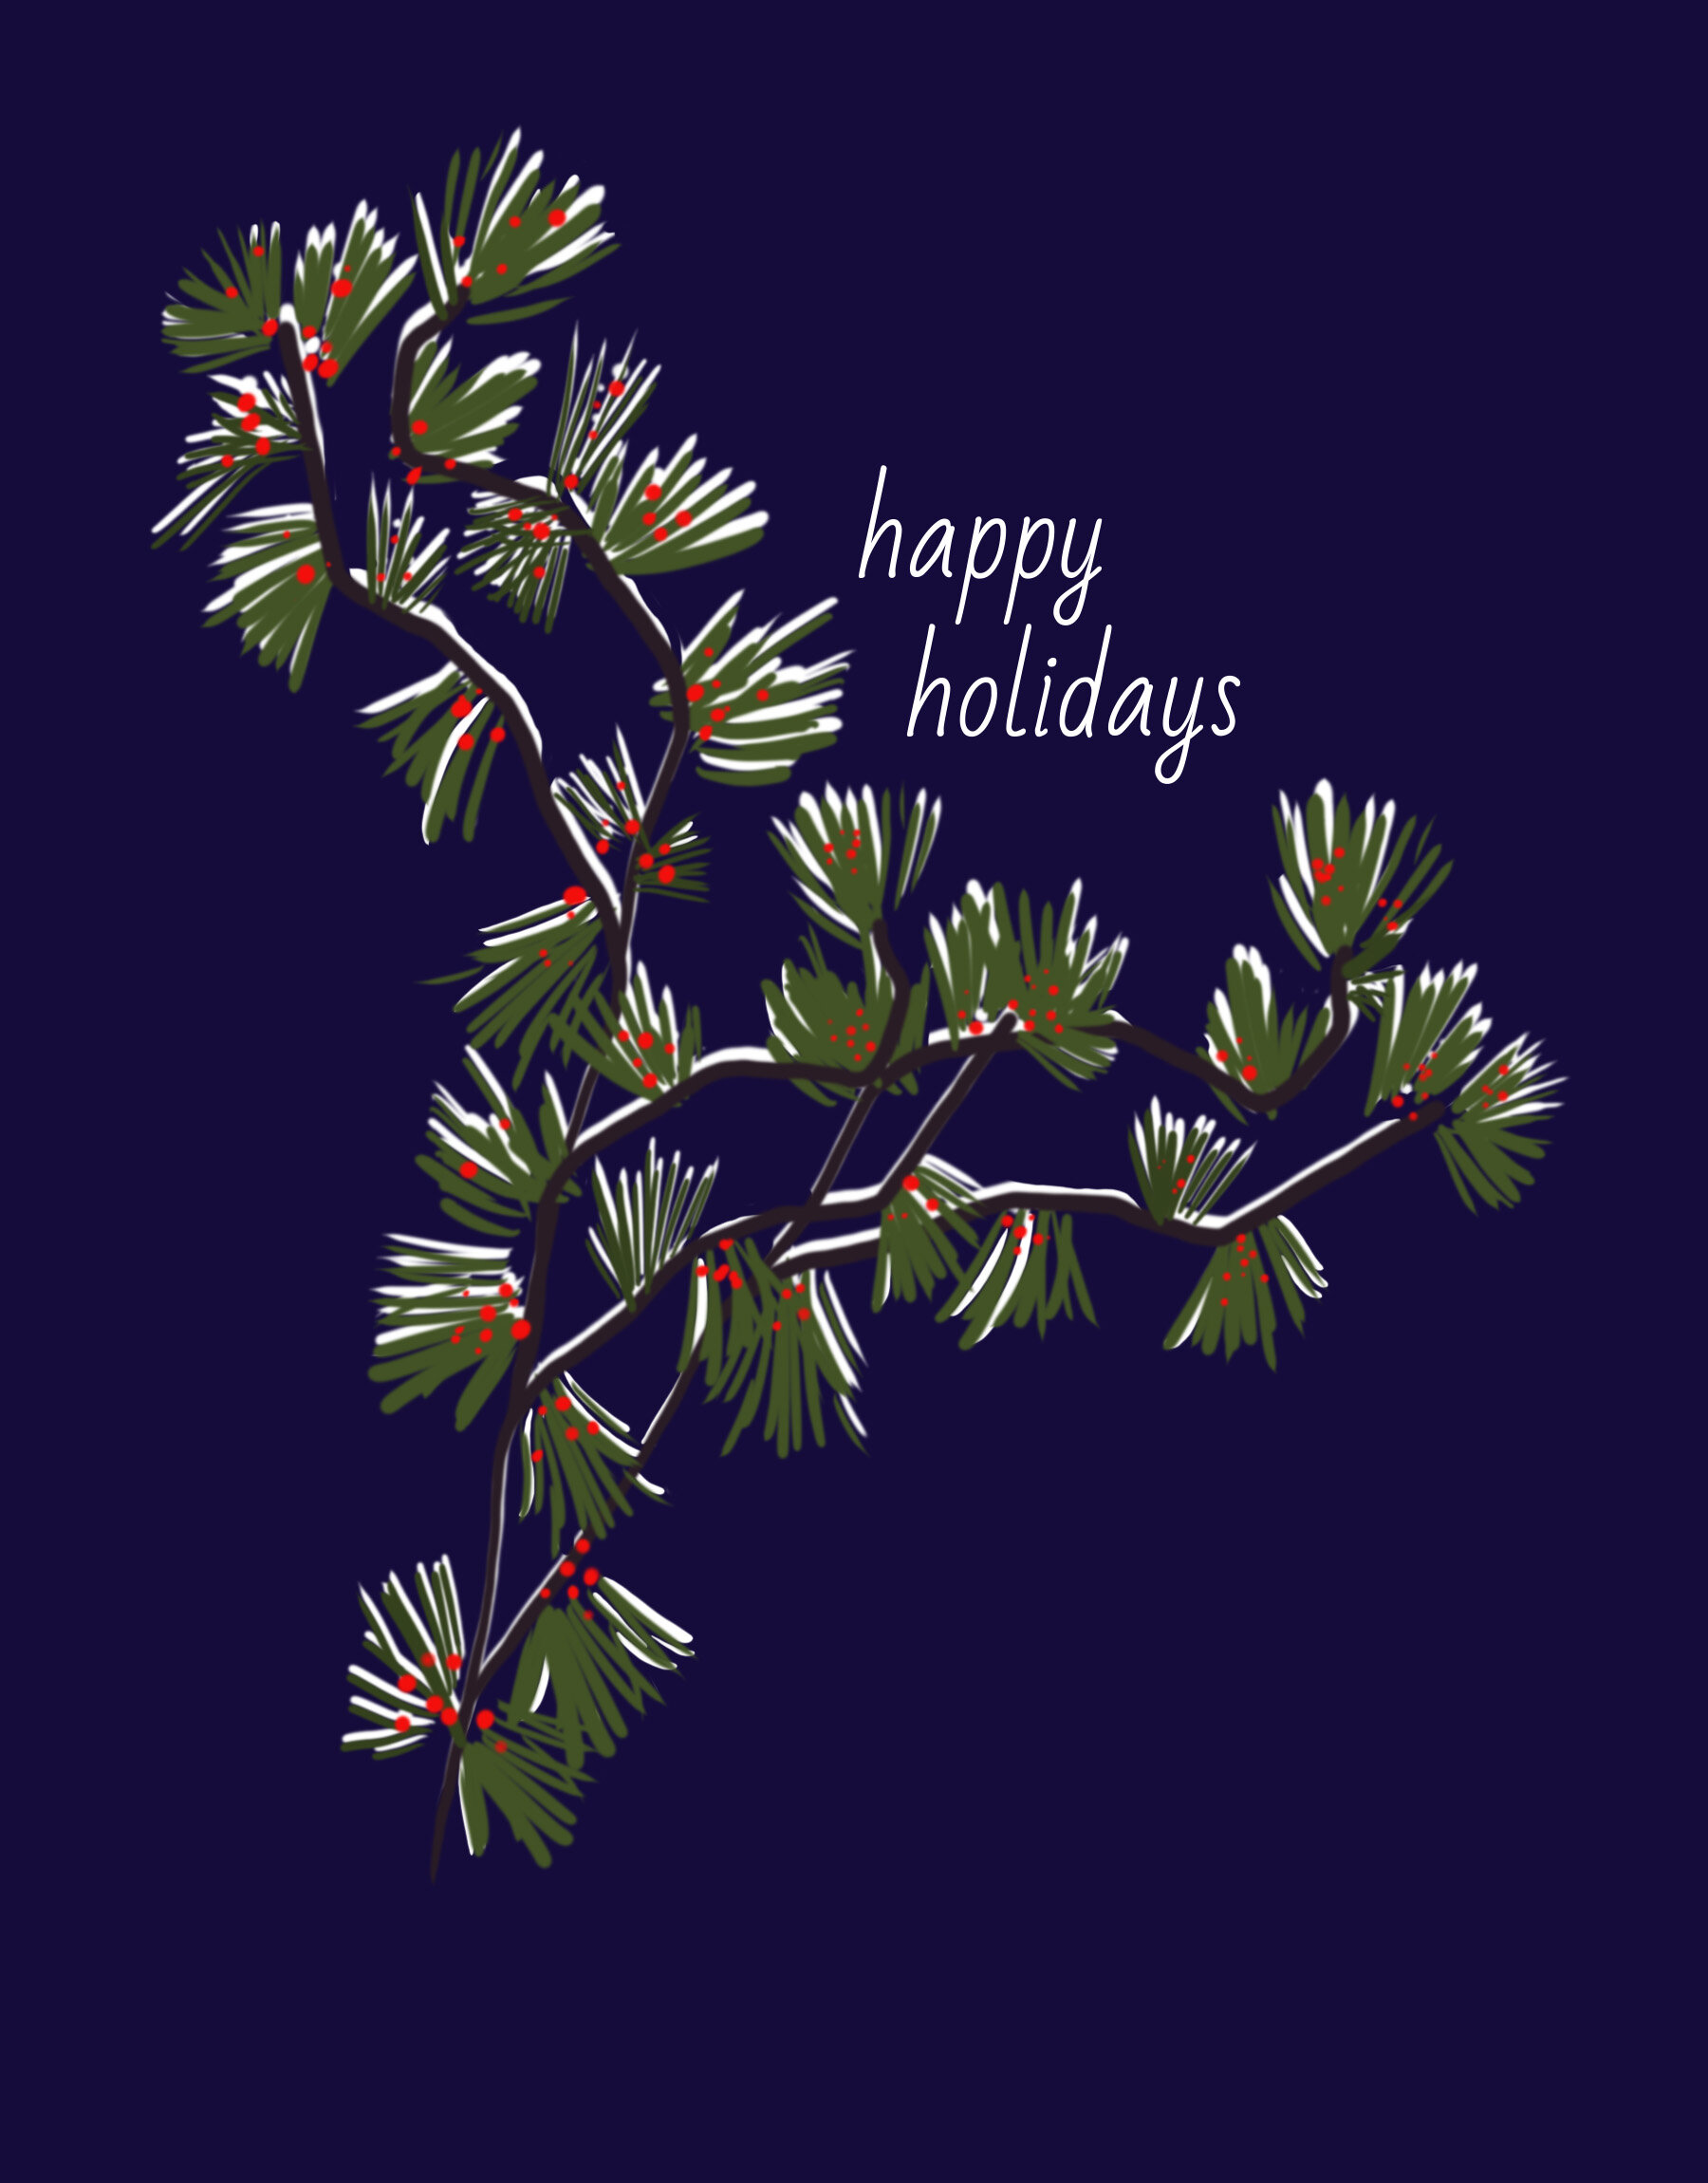 frozen branches with text merged.jpg